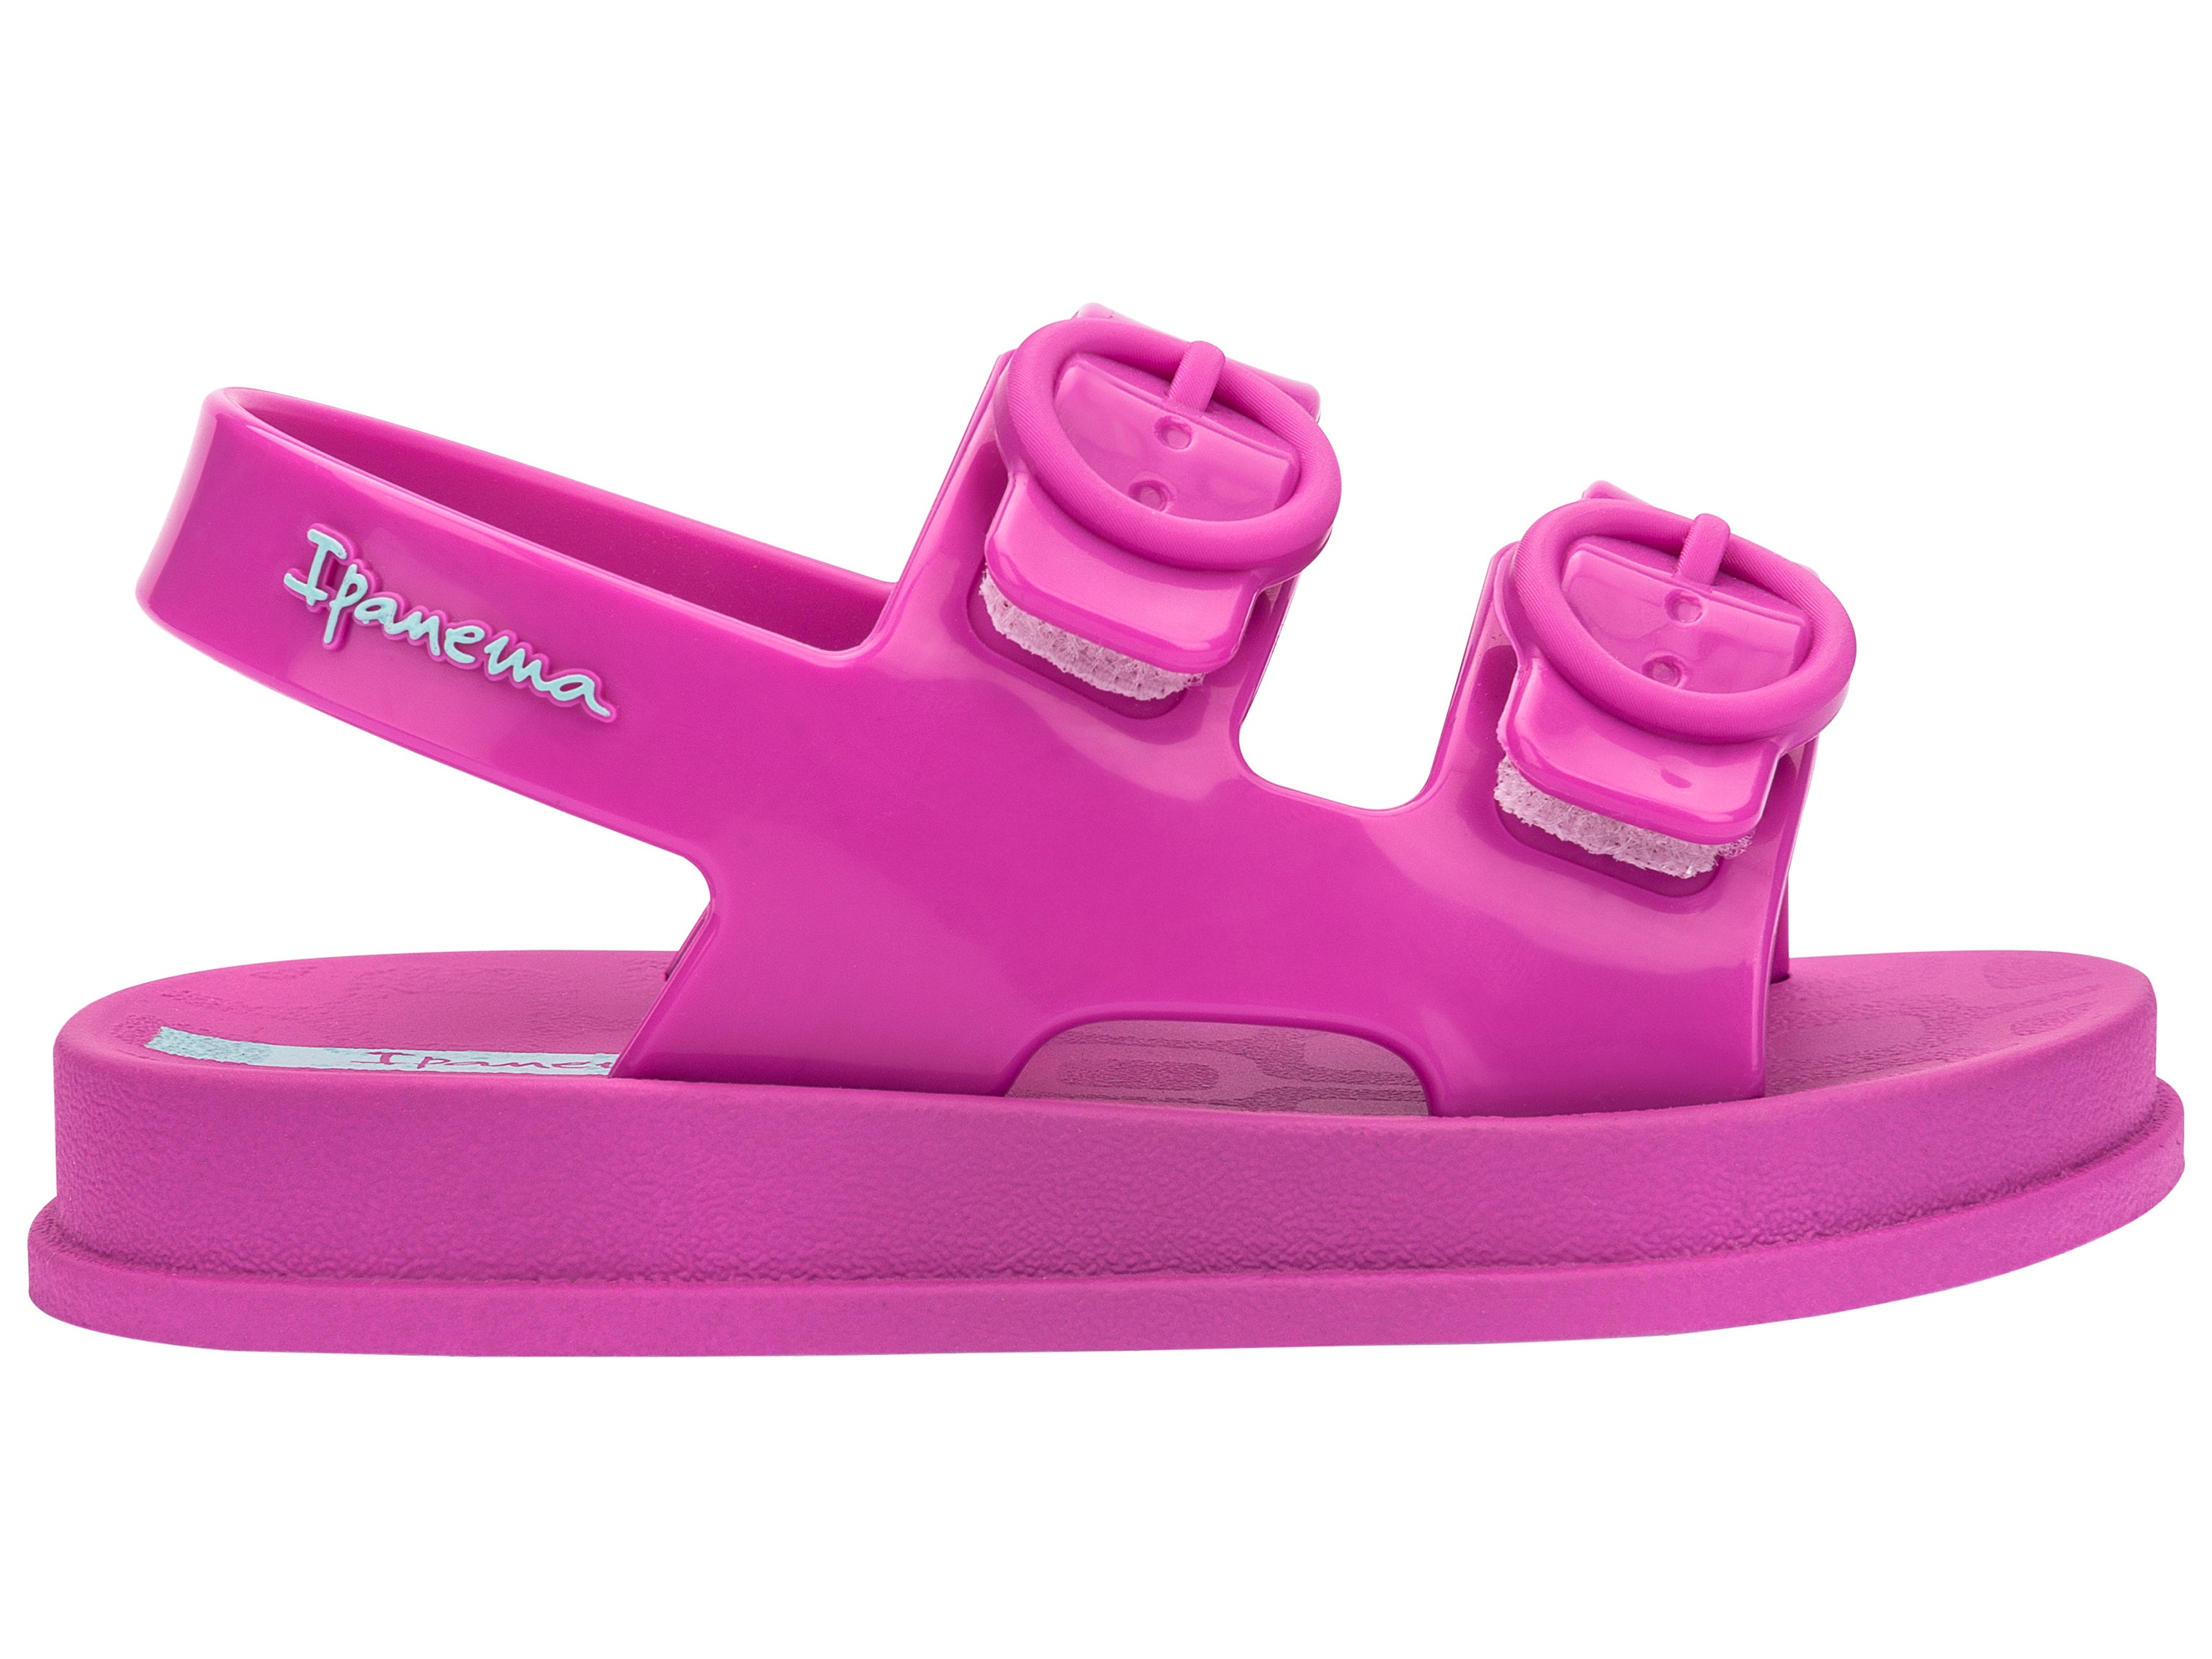 Outer side view of a pink Ipanema Follow baby sandal with two decorative buckles on the upper.